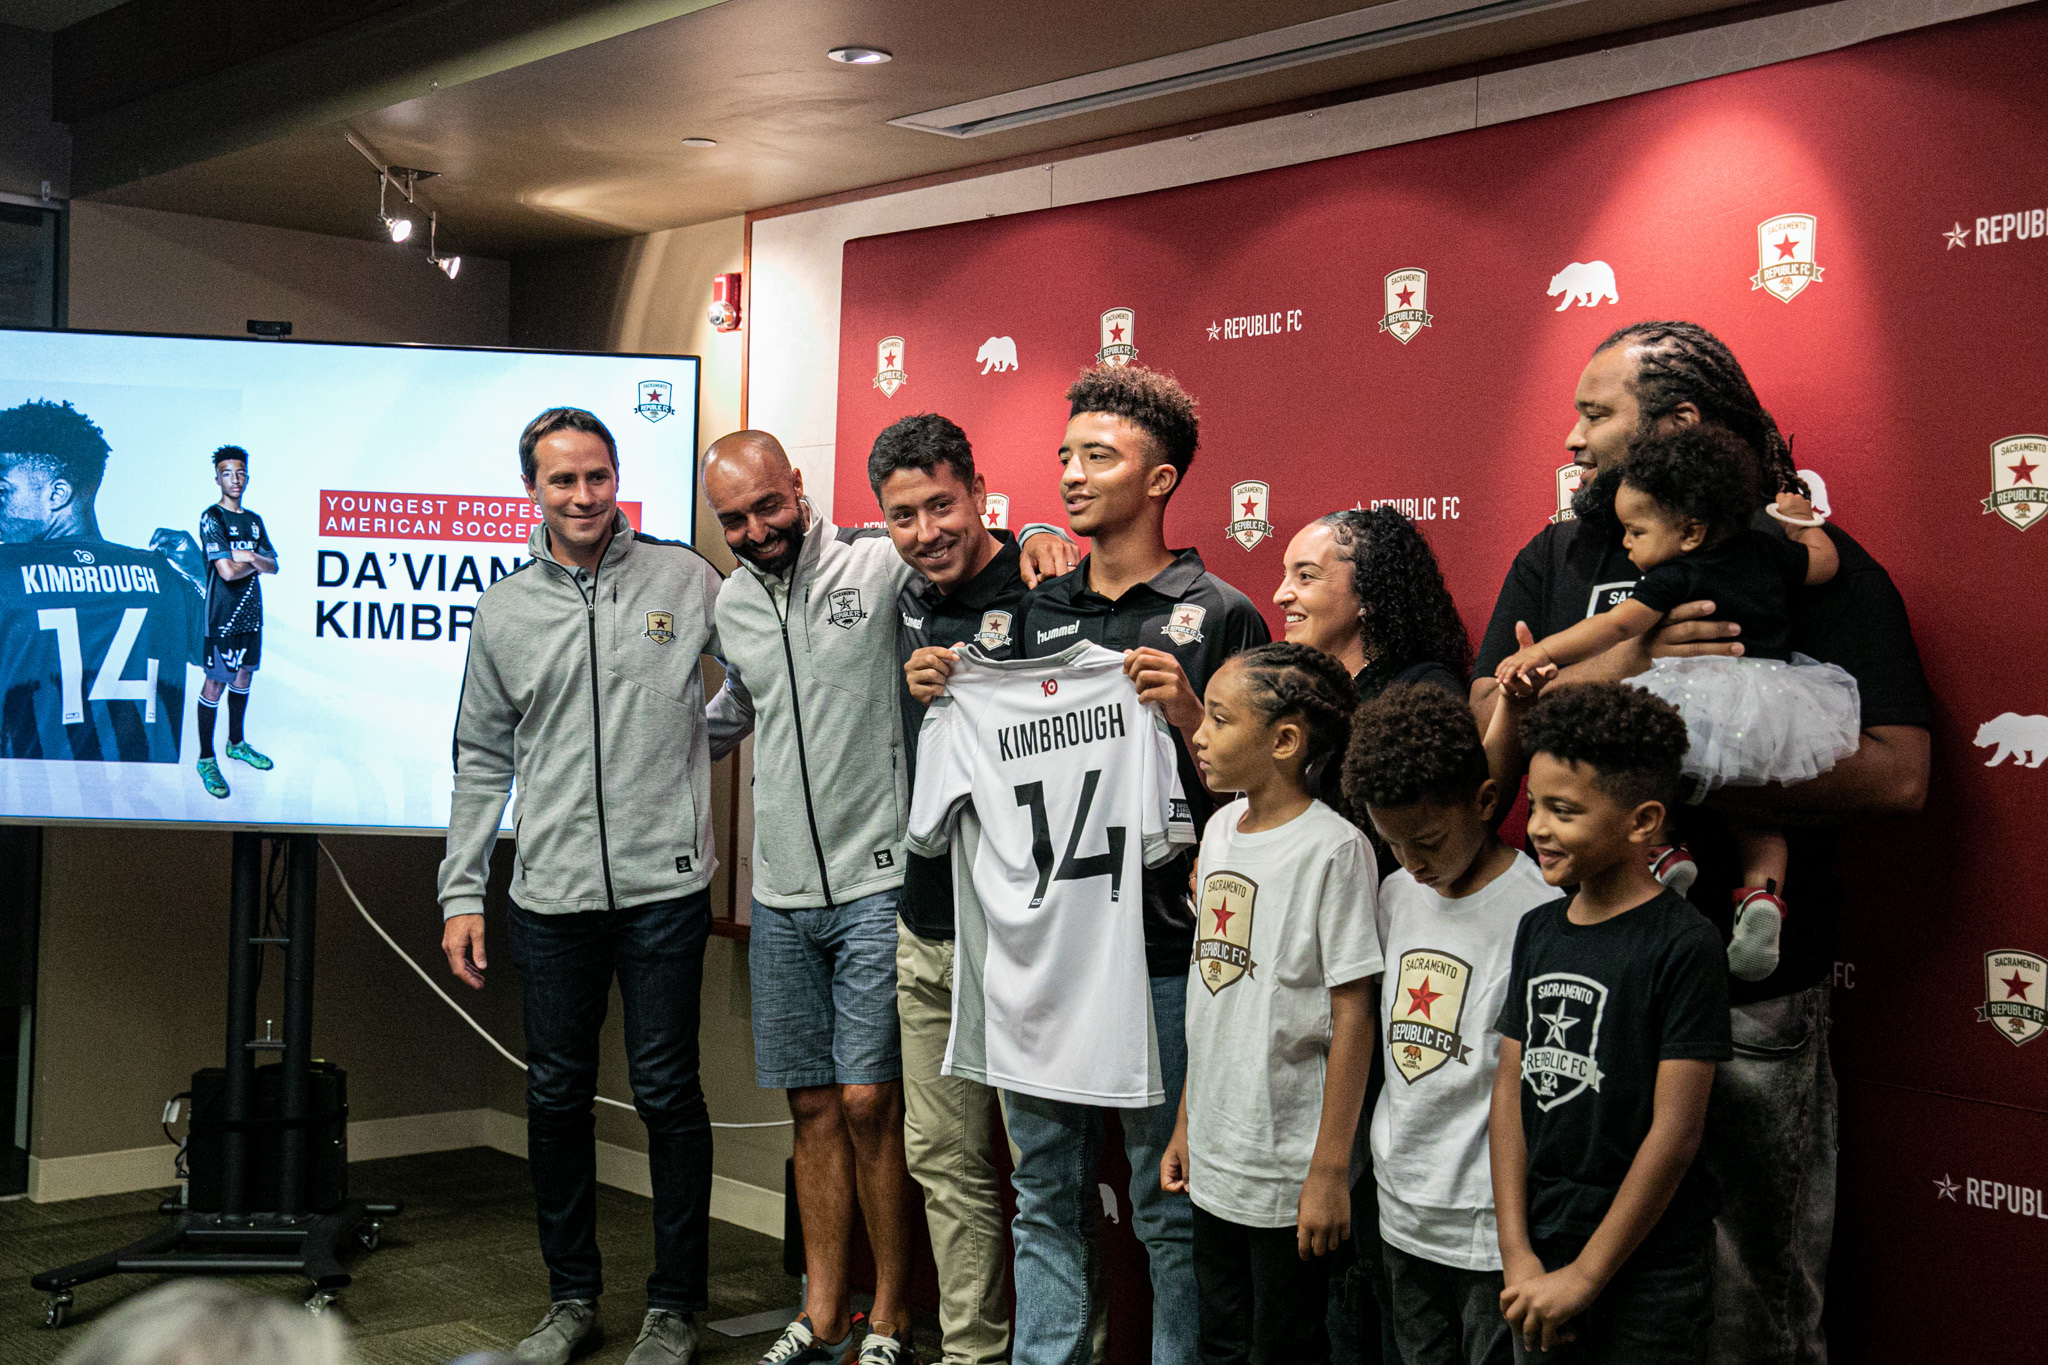 A teen holds up a white jersey reading Kimbrough surrounded by adults and children in front of a backdrop reading Republic FC.